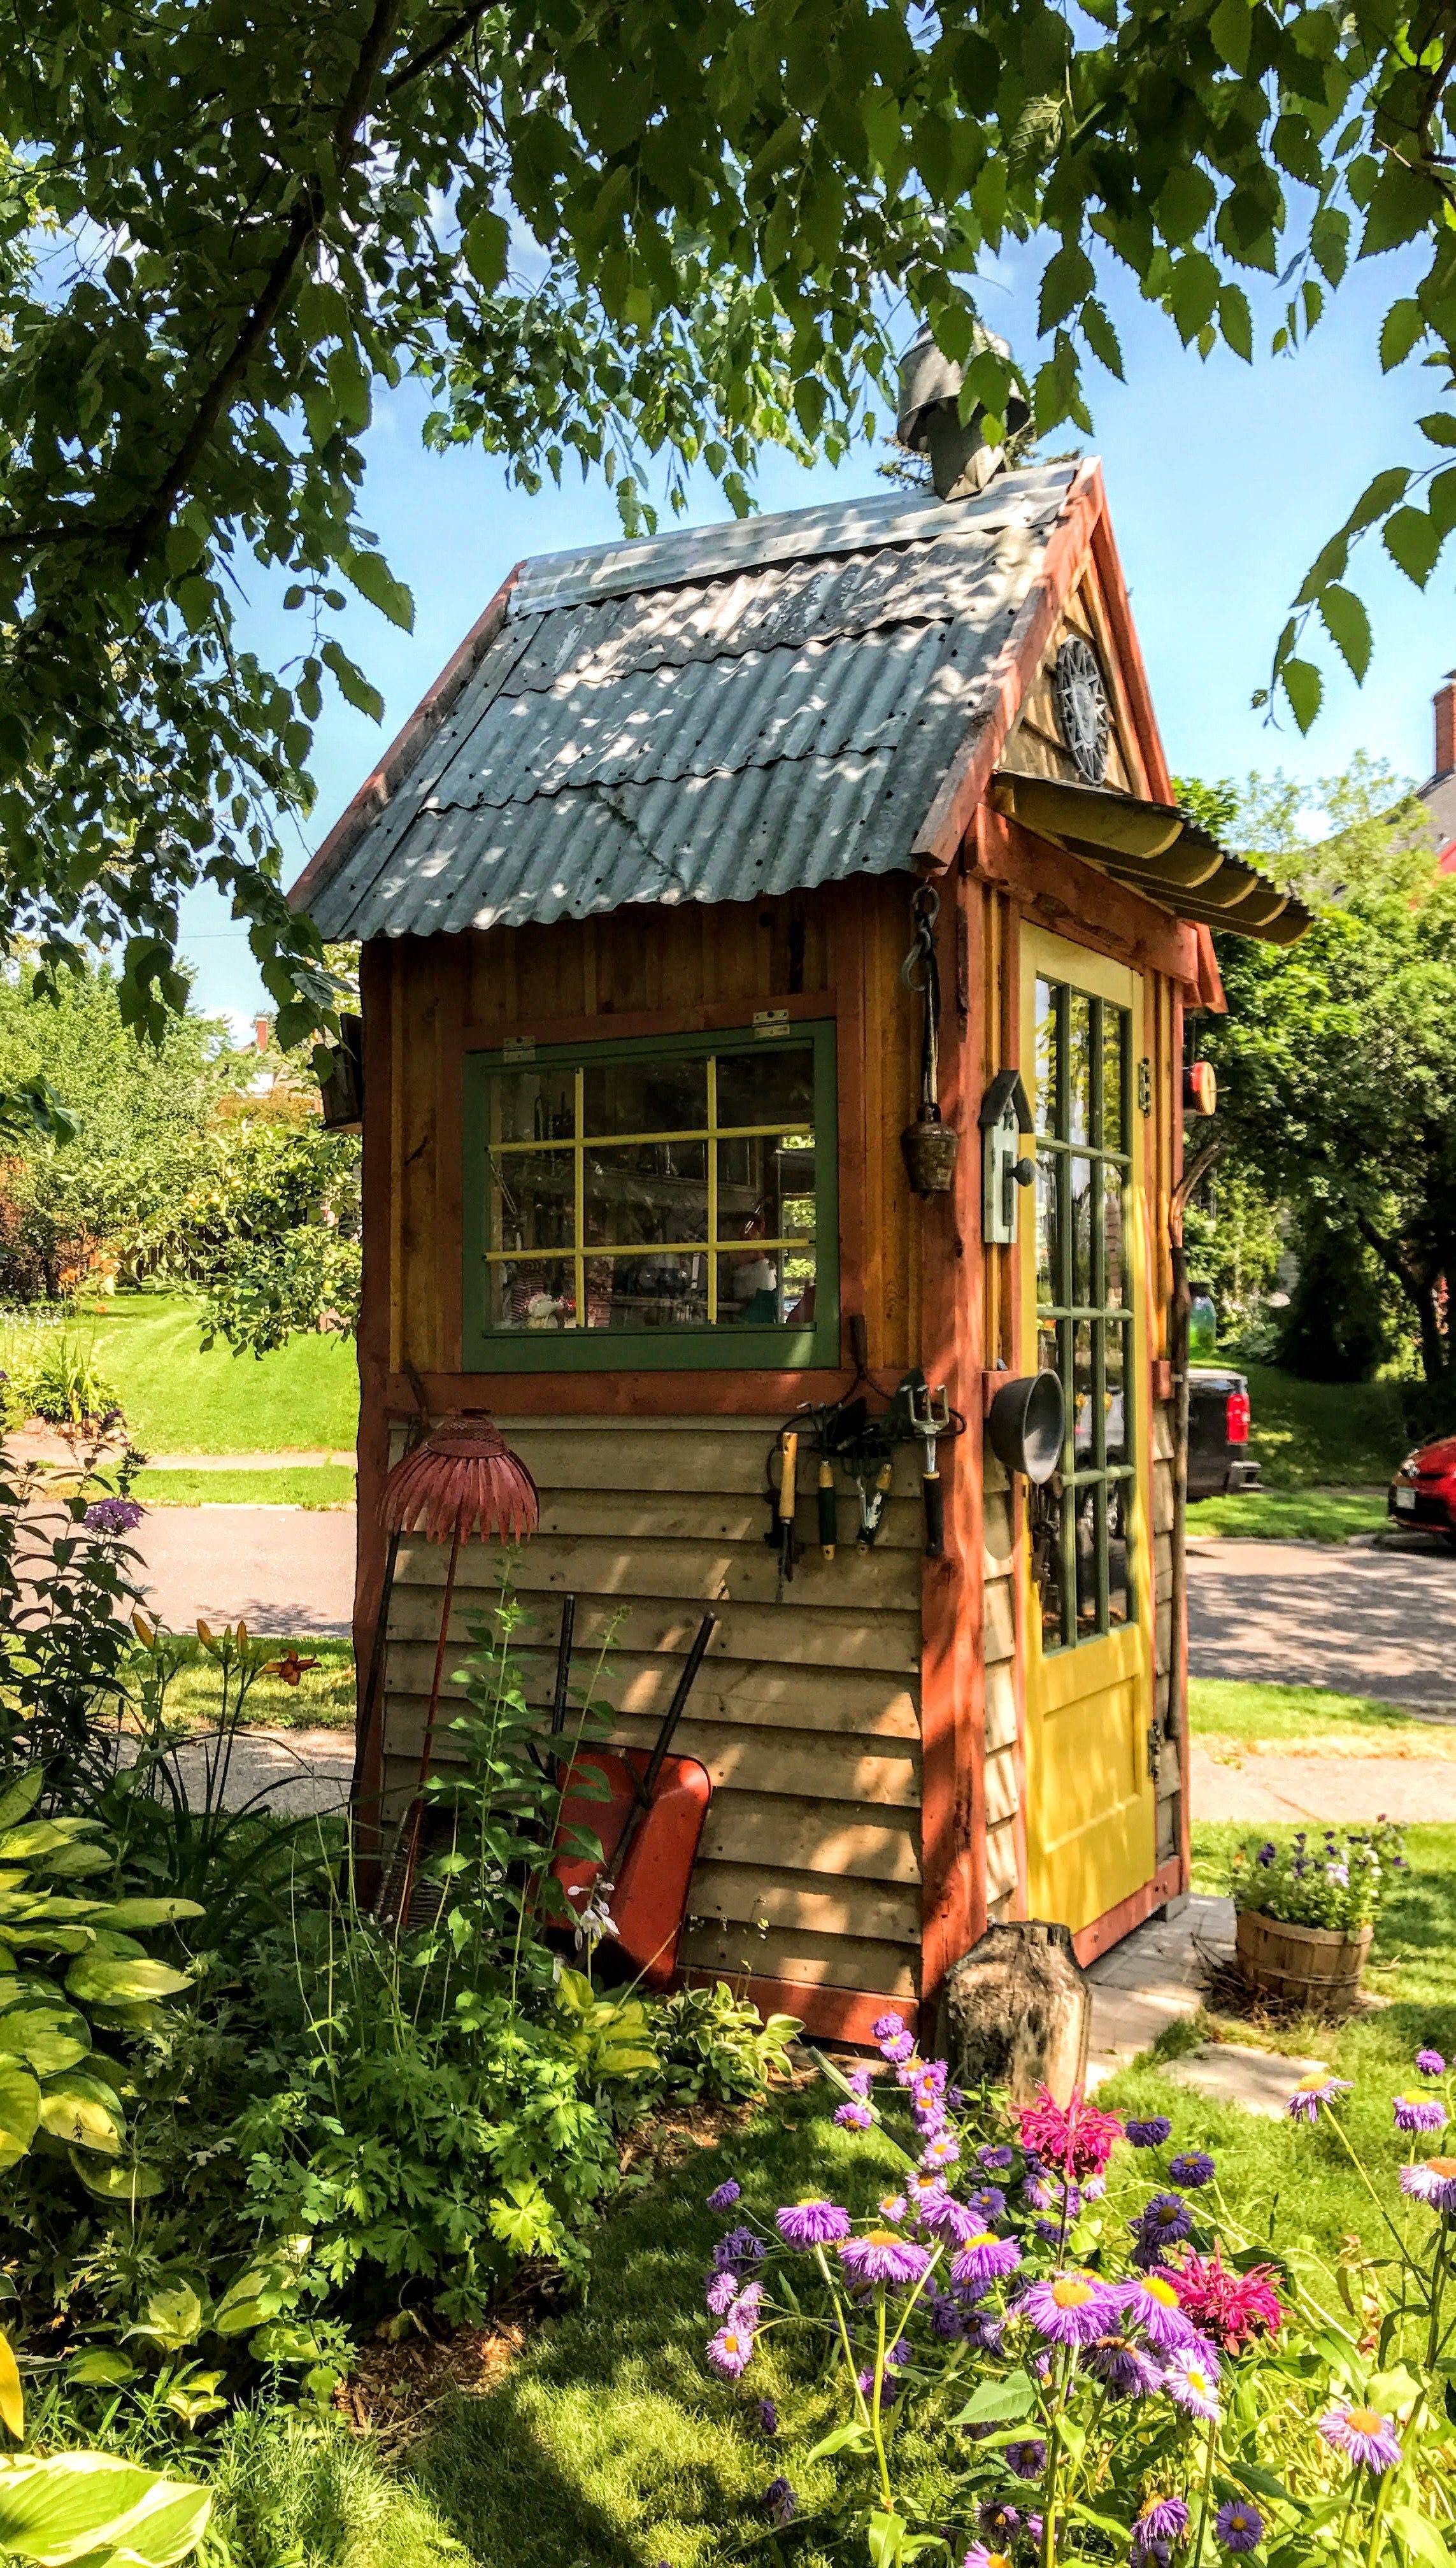 Garden Sheds Whimsical Structures